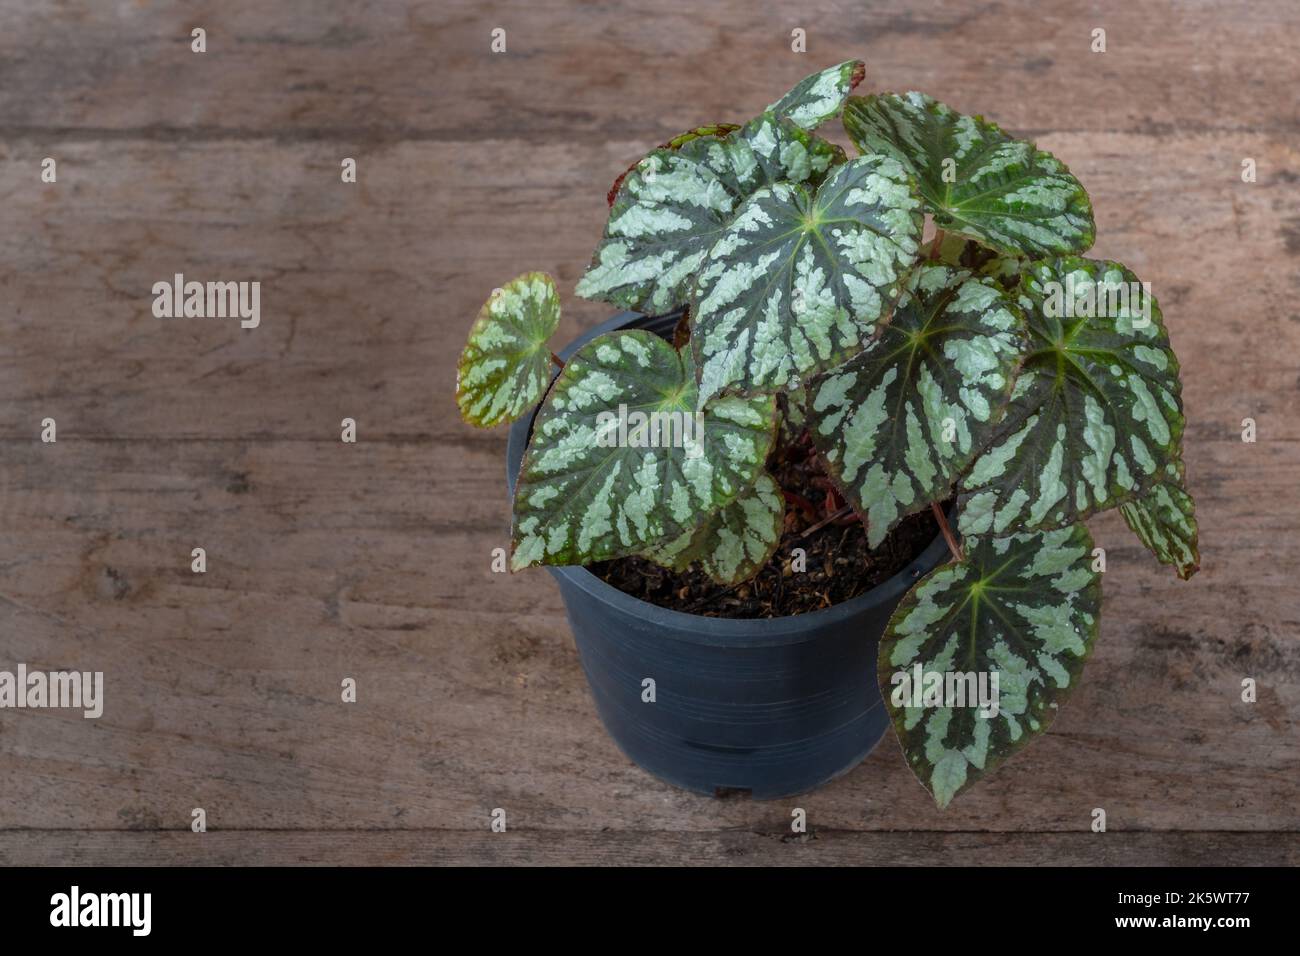 Closeup view of colorful dark green and silver white foliage of begonia rex hybrid isolated on wooden table outdoors Stock Photo